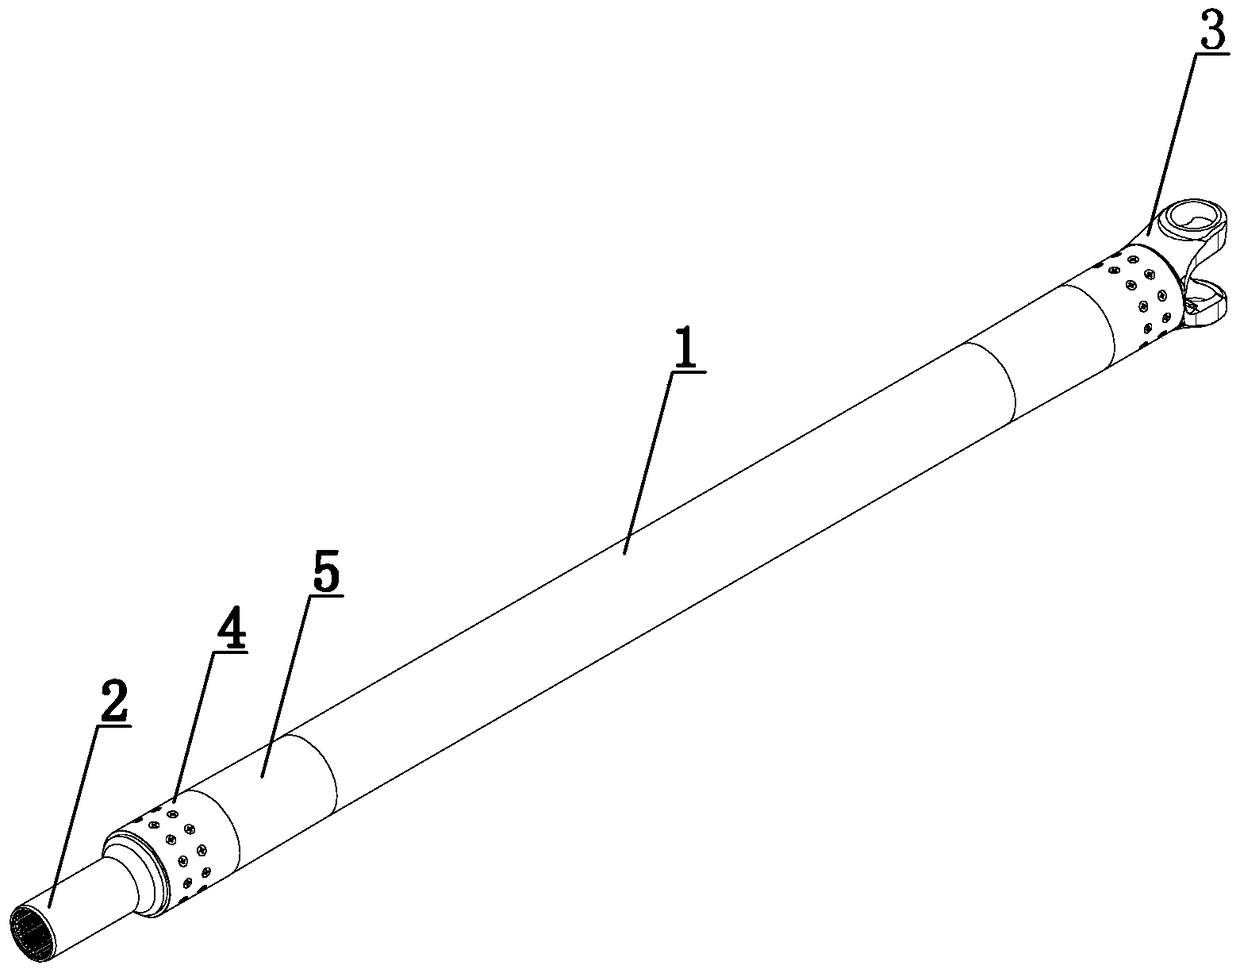 A drive shaft for a vehicle